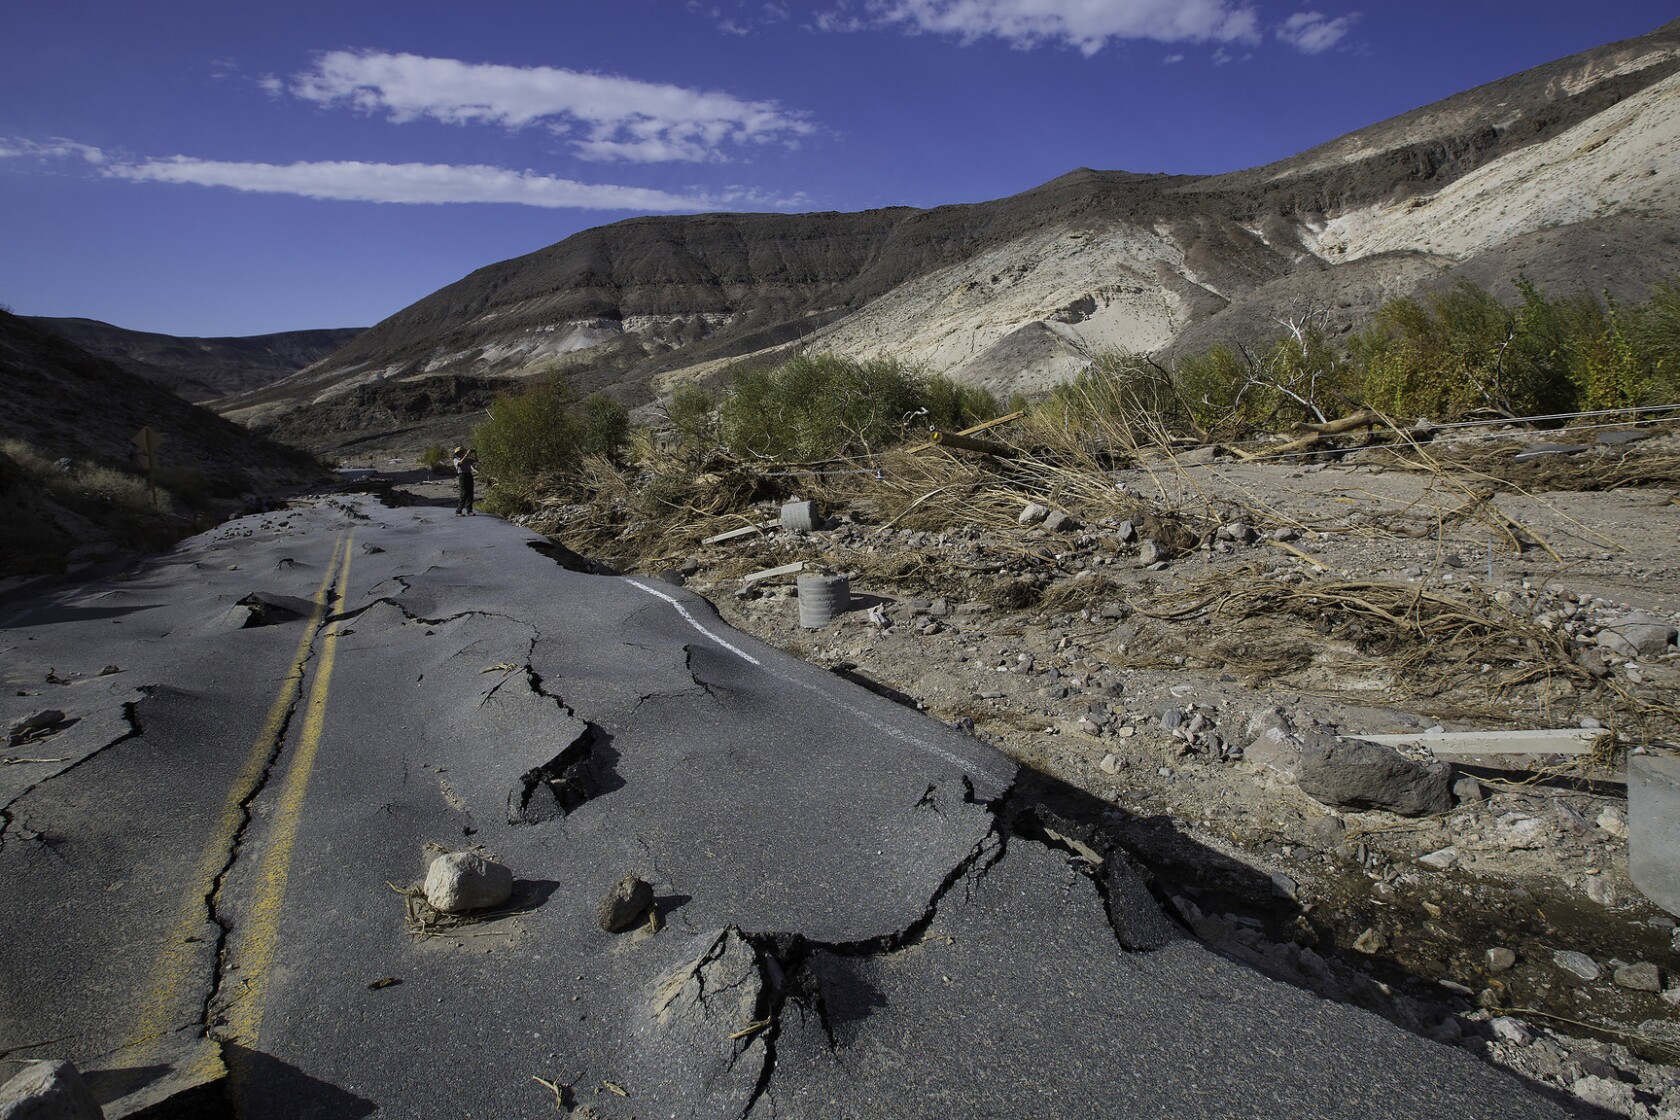 After historic flooding, Death Valley gears up for 'a long, hard